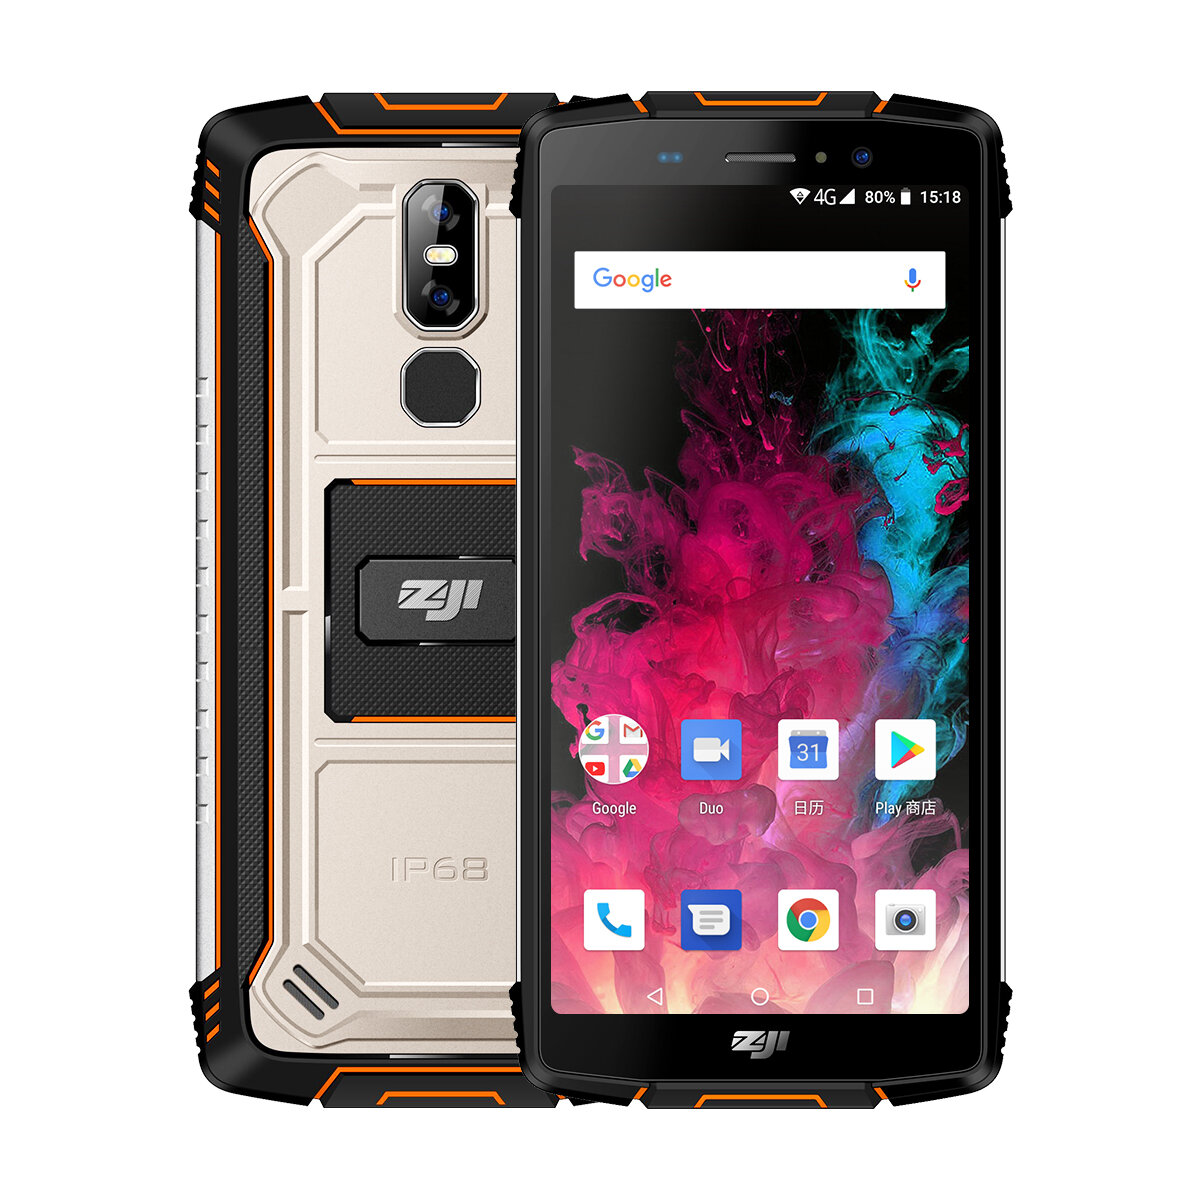 US$299.99 32% HOMTOM ZOJI Z11 5.99 Inch IP68 10000mAh Android 8.1 4GB RAM 64GB ROM MTK6750T Octa Core 1.5GHZ 4G Smartphone Smartphones from Mobile Phones & Accessories on banggood.com